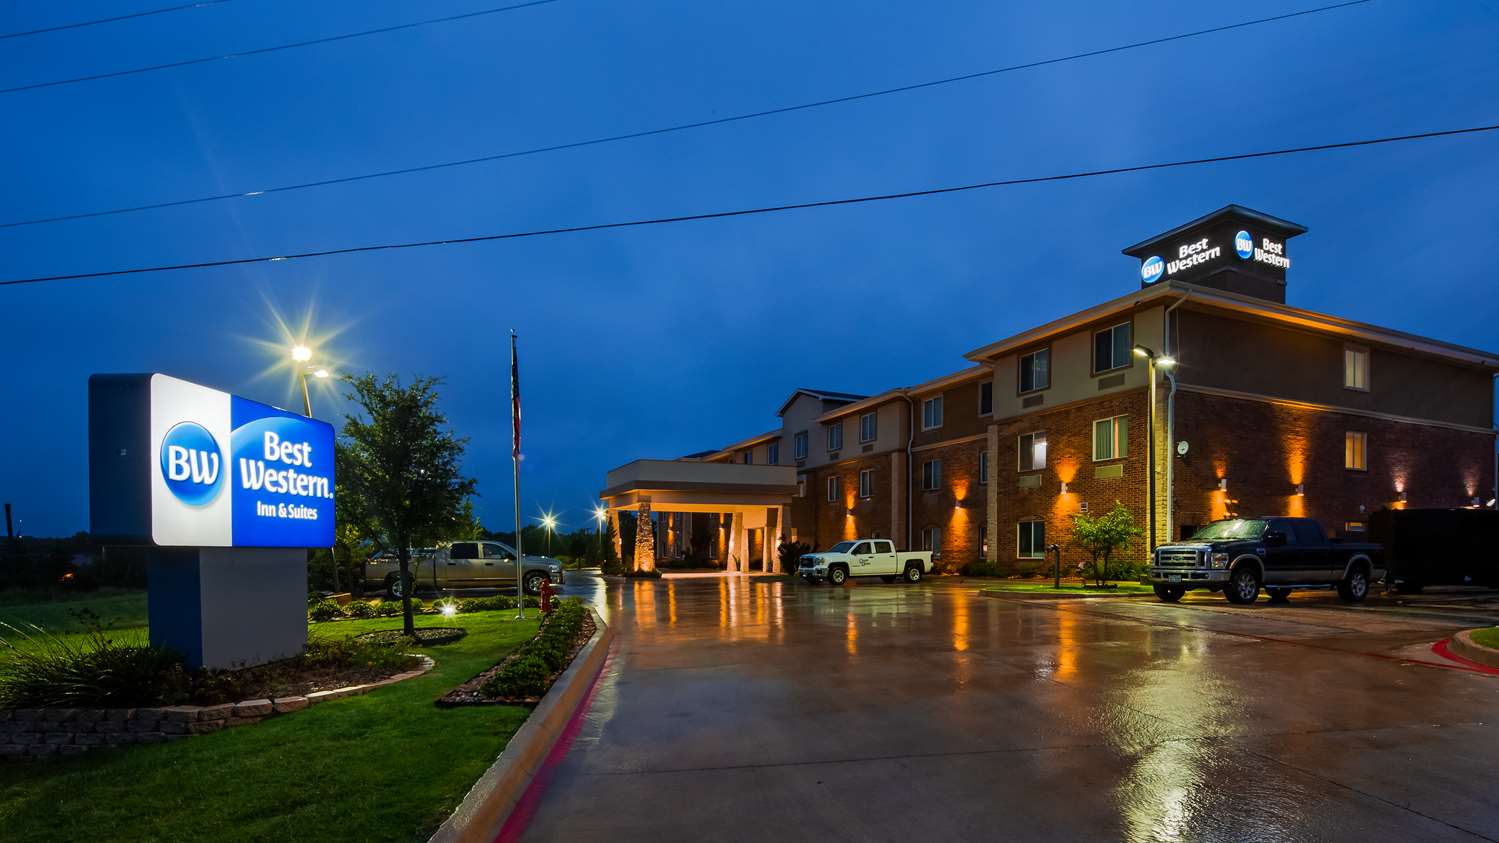 Bowie TX Hotels Best Western Bowie Inn & Suites Bowie Rodeo Arena Hotel